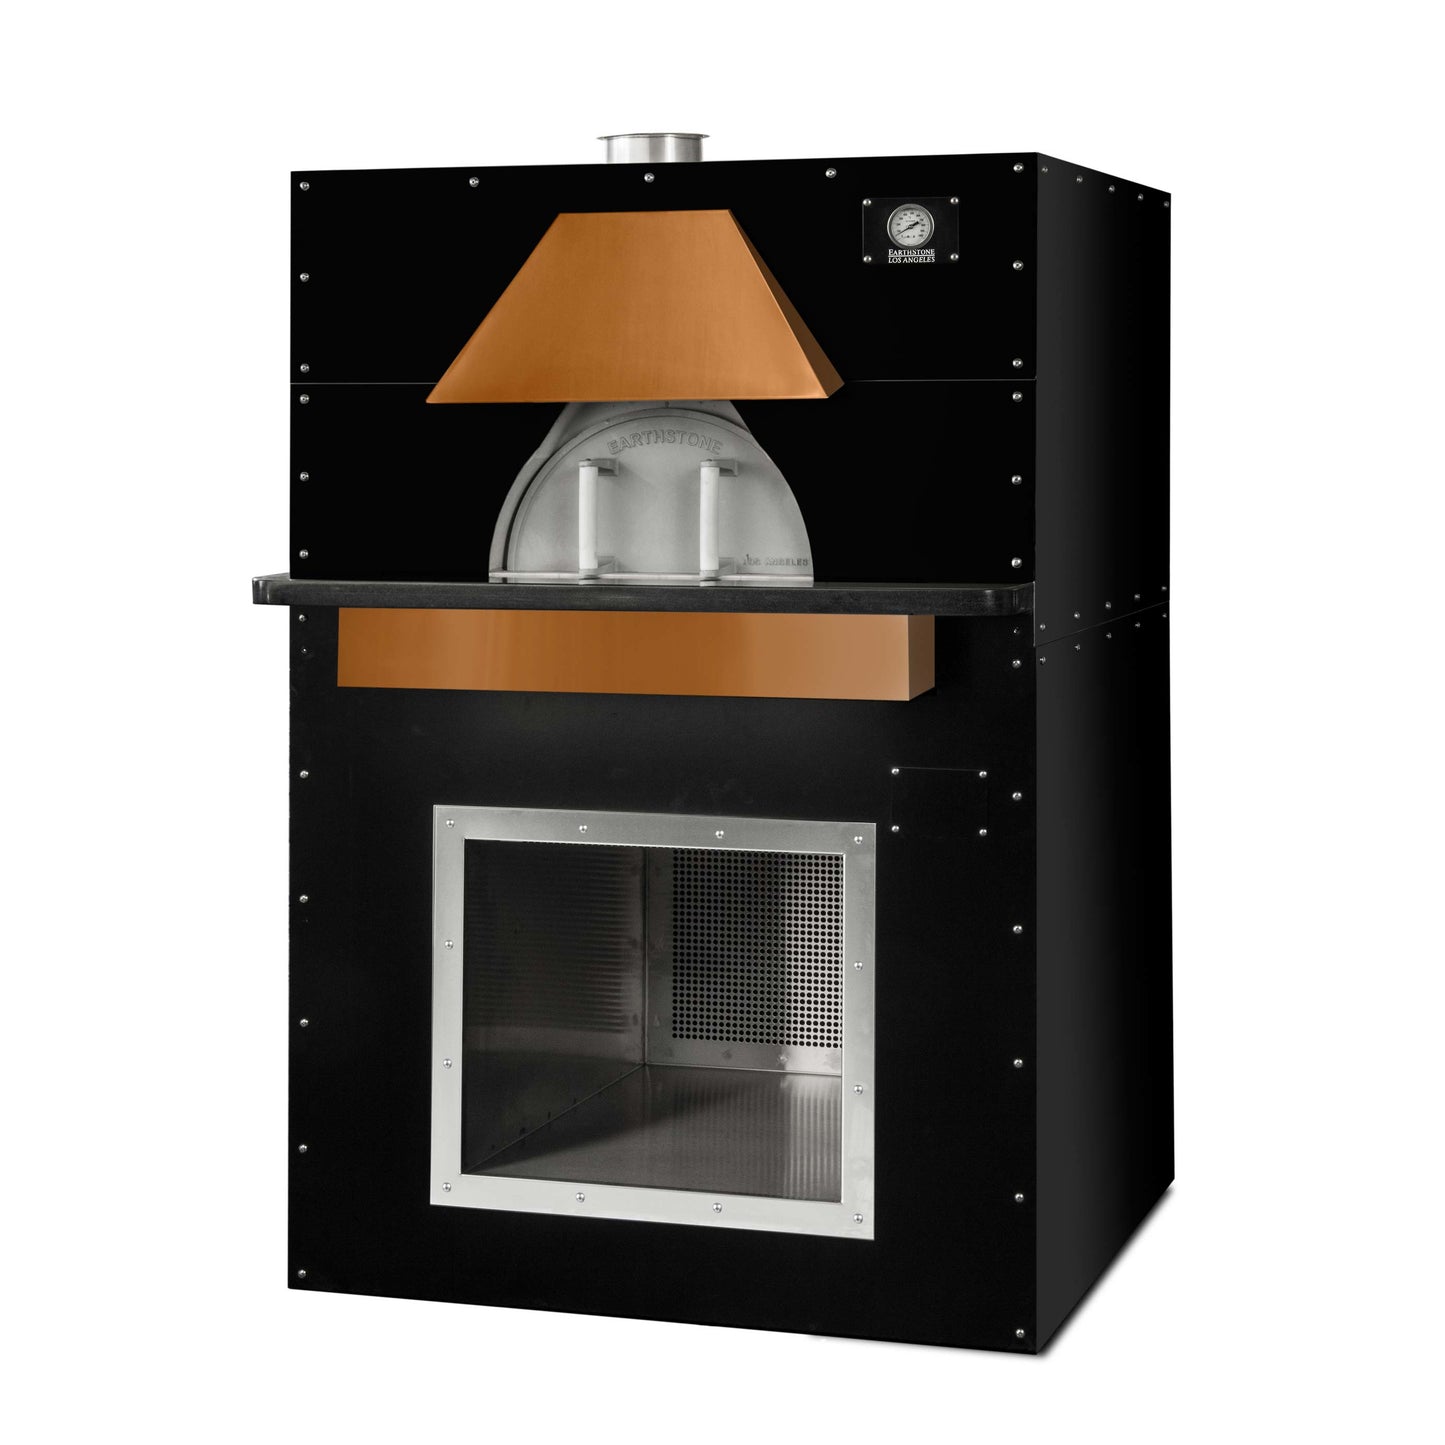 The Cafe-PAG – Gas Fired Pre-Assembled Oven